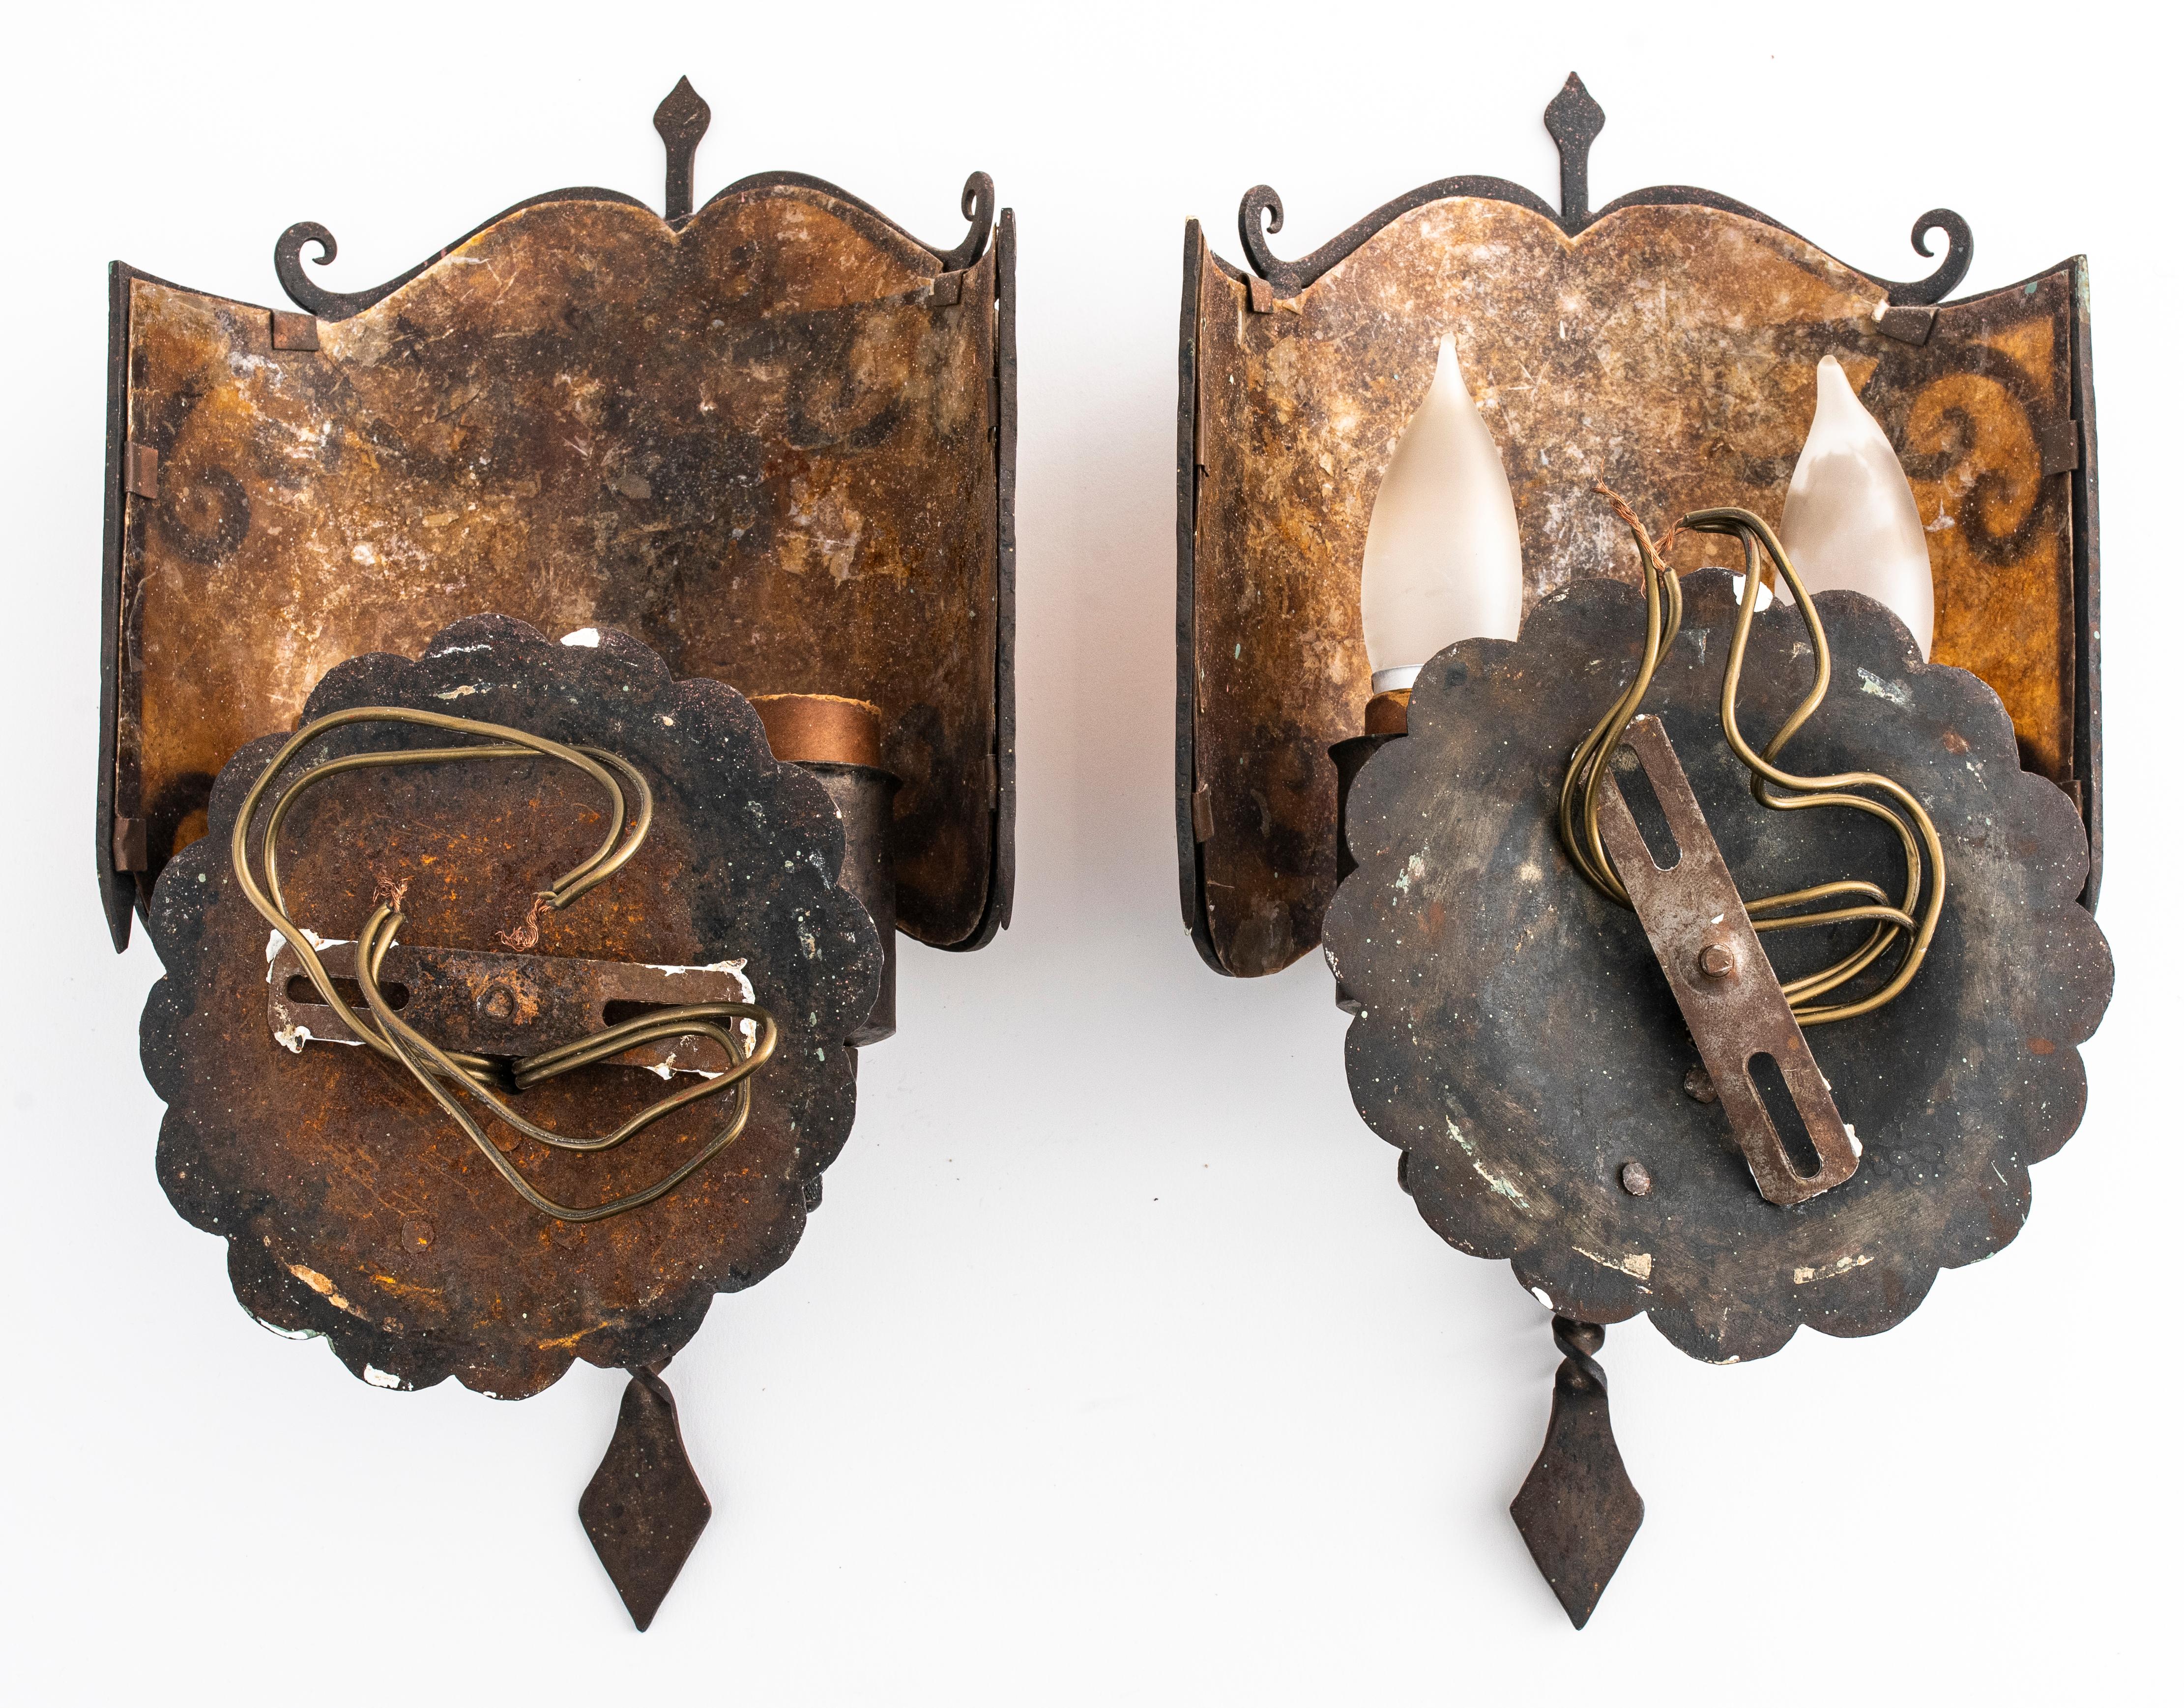 Pair of sconces attributed to Oscar Bach in Arts and Crafts style, with mica shades, hammered metal and decorated with figures of lions. From a Rye, New York private collection. Measures: 13.5